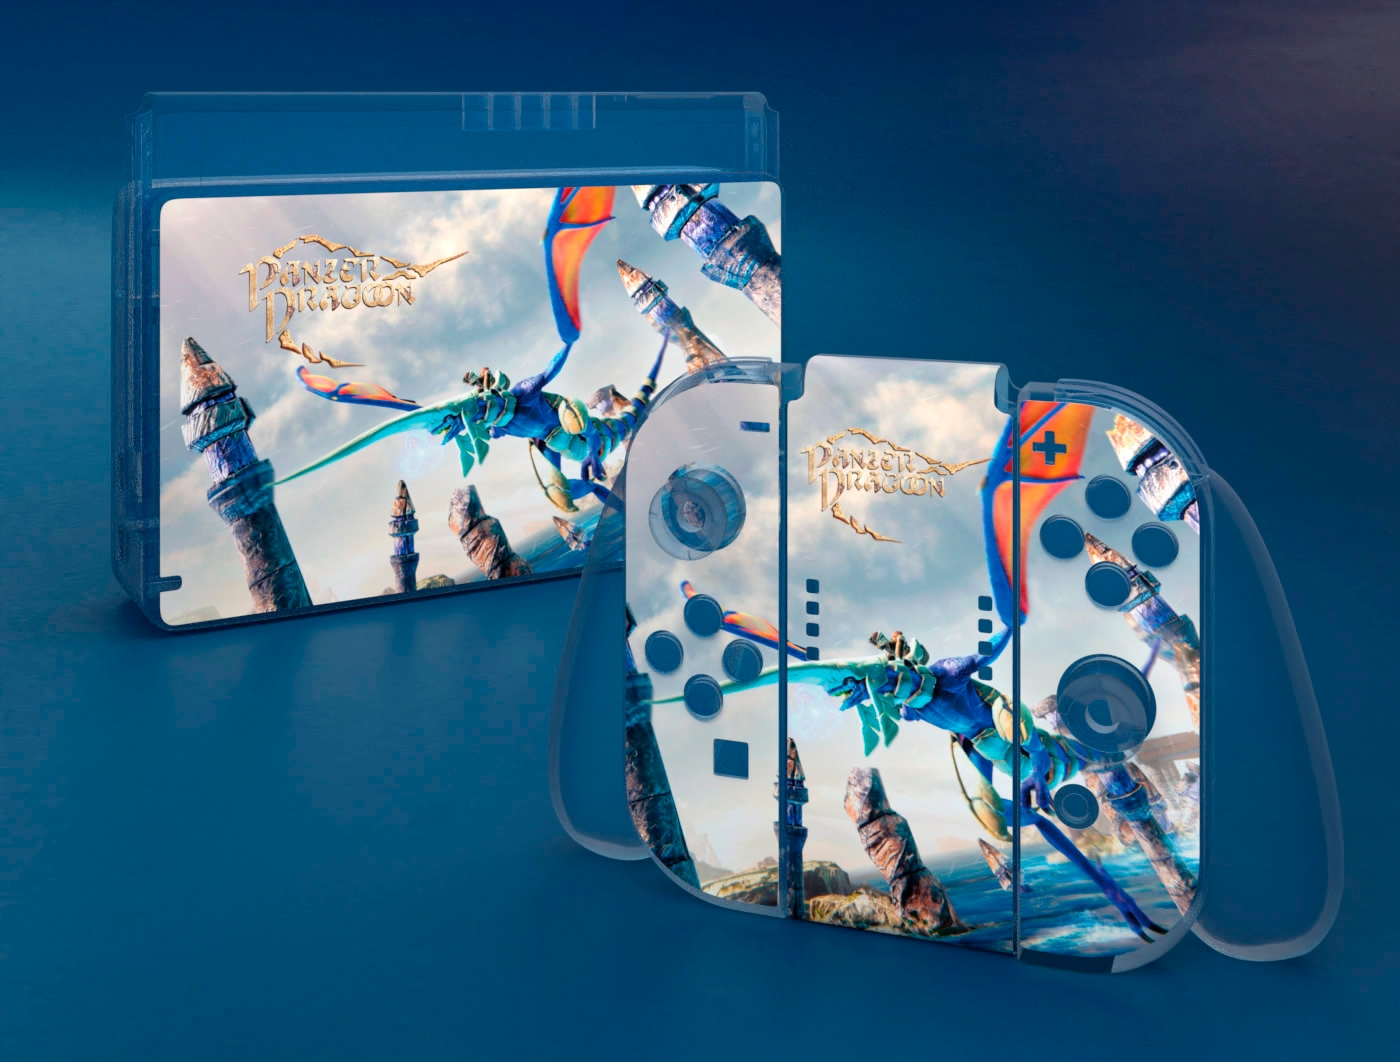 Forever Limited's Panzer Dragoon: Remake Sets Are Now Shipping